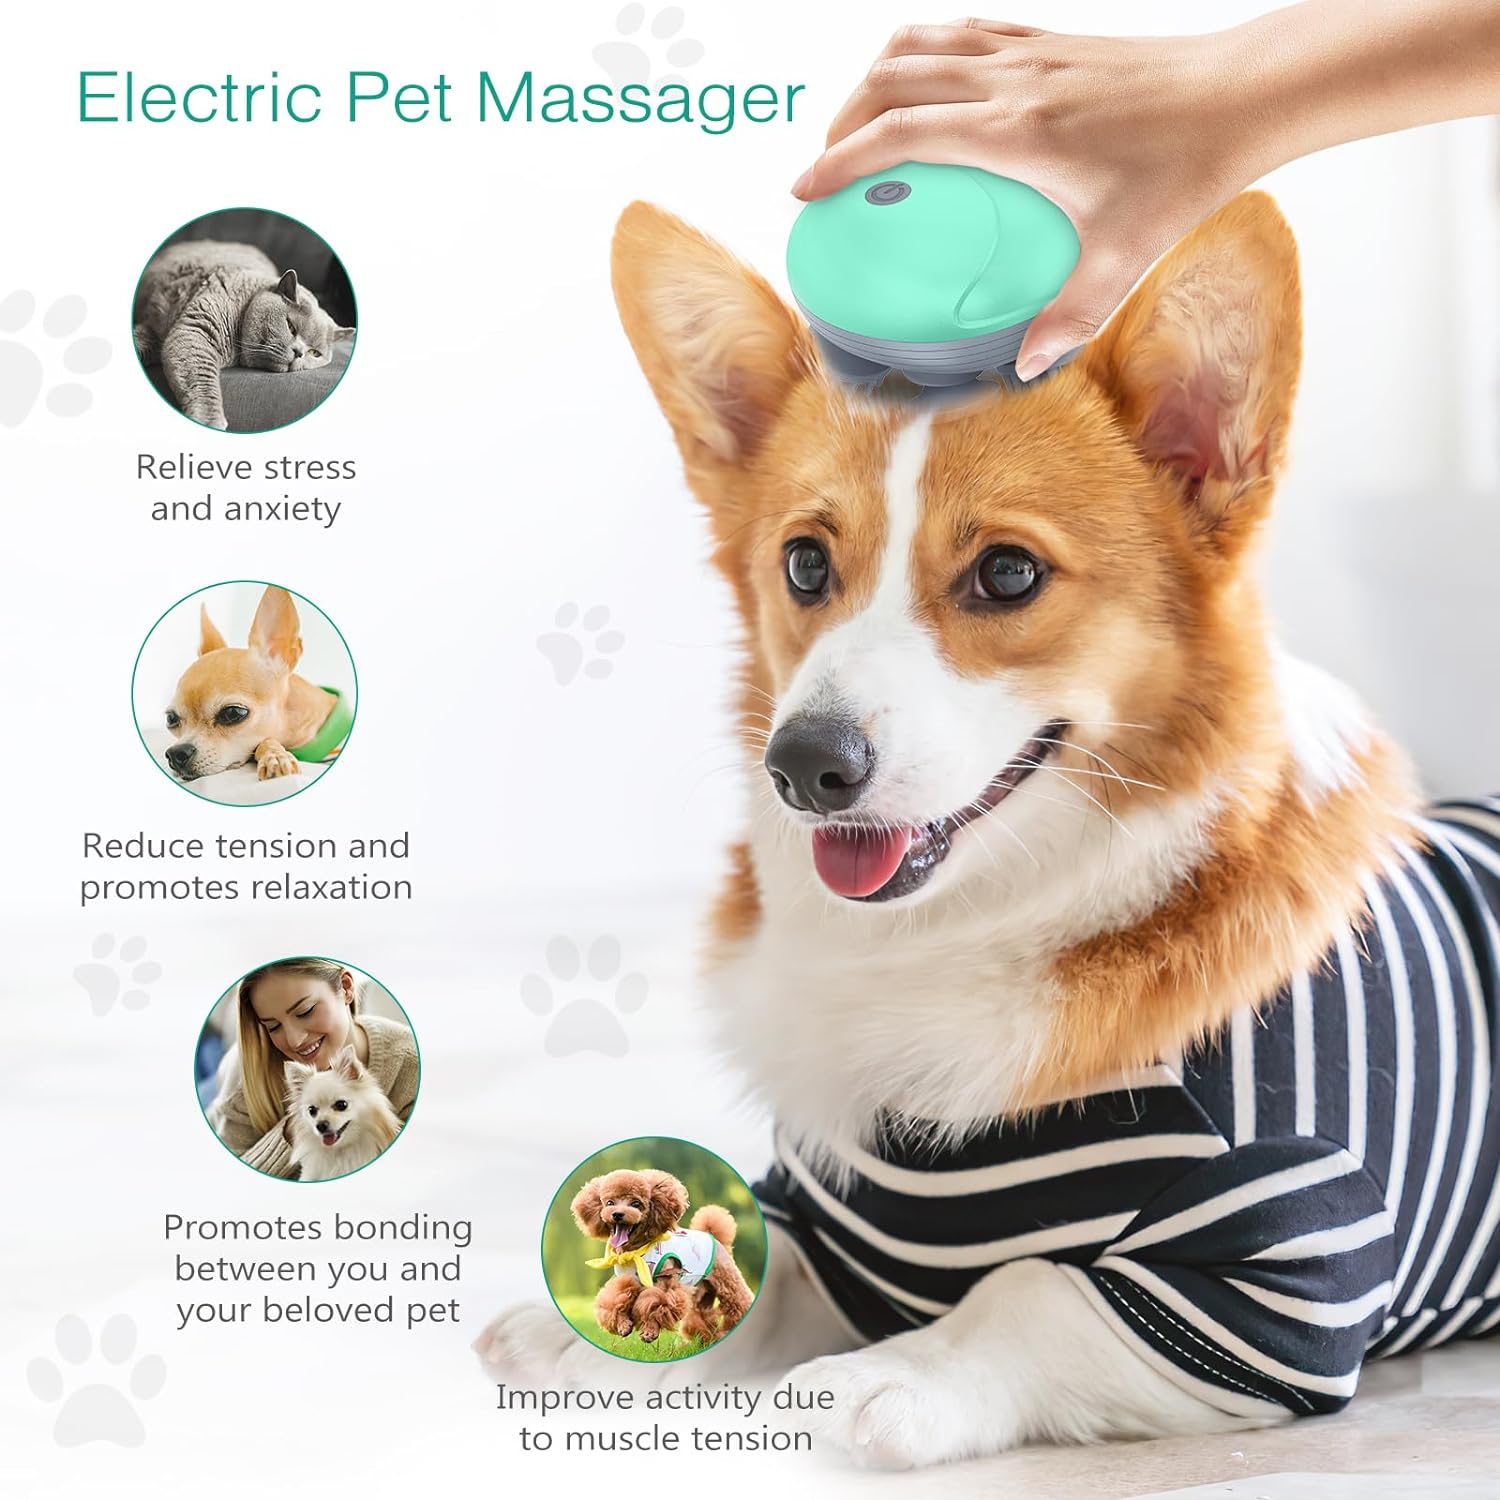 ORIA Upgraded Handheld Pet Massage for Dog and Cat, Electric Cat Massager Dog Massager, with 4 Rotatable Massage Heads